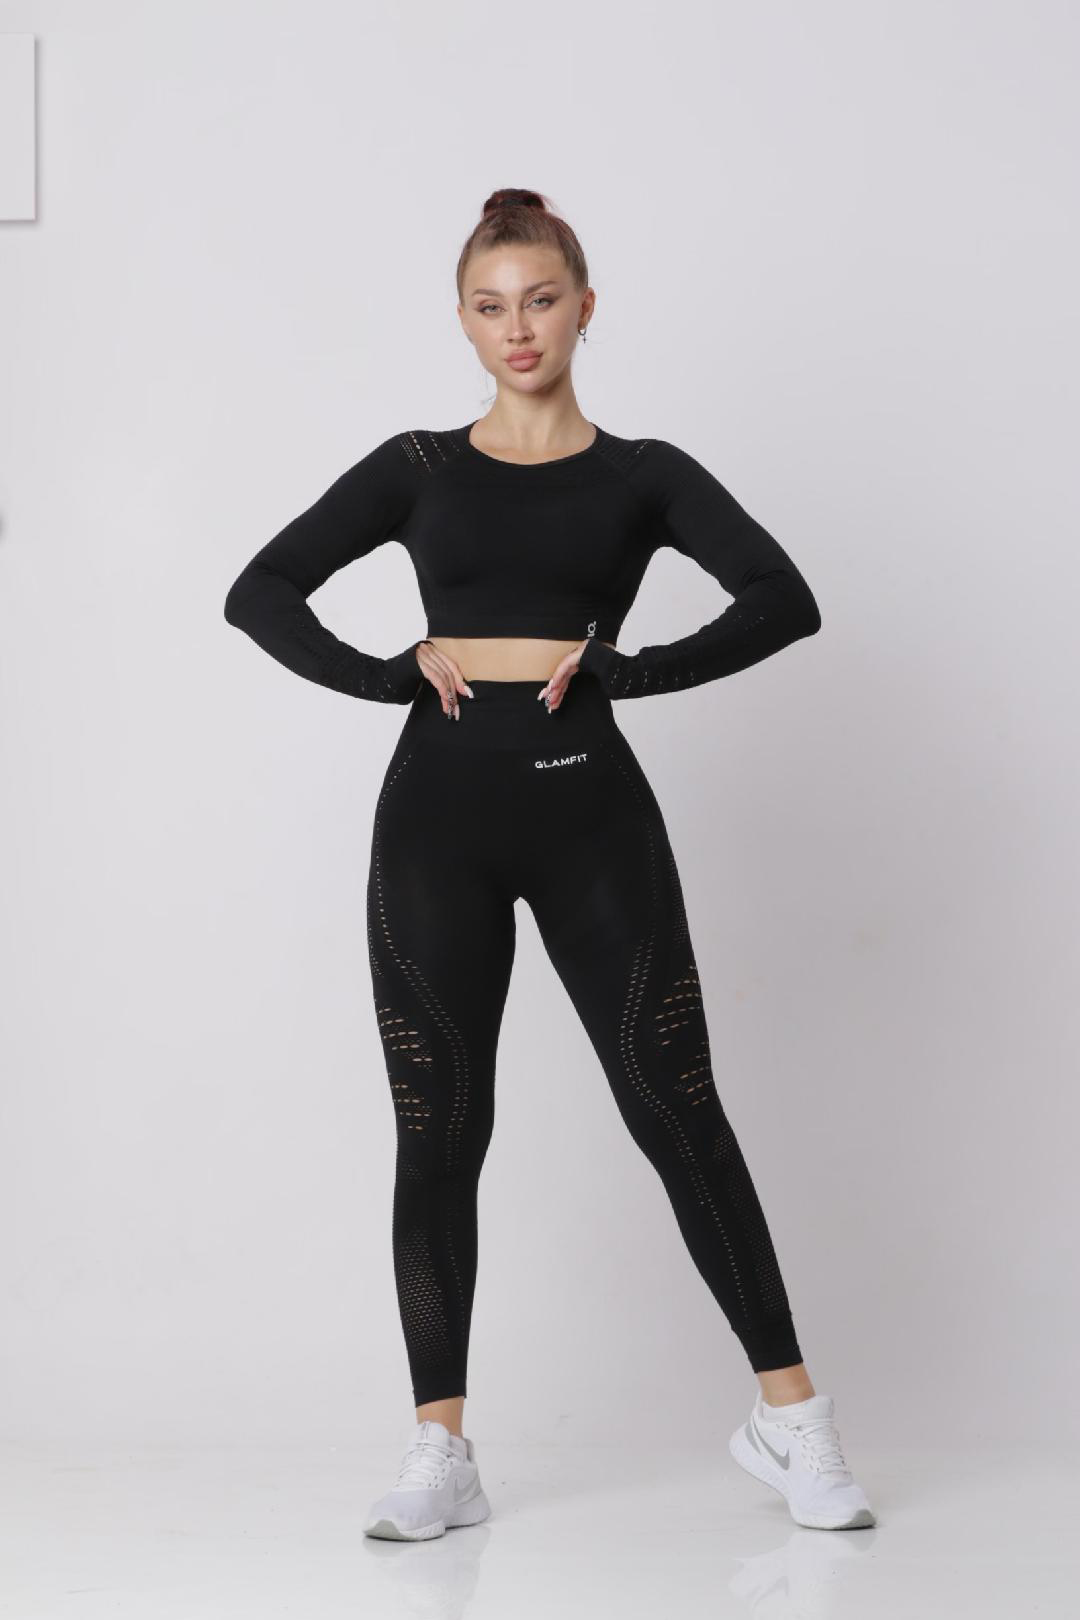 Women's Seamless Workout Outfits in Black Shop Now - Glamfit